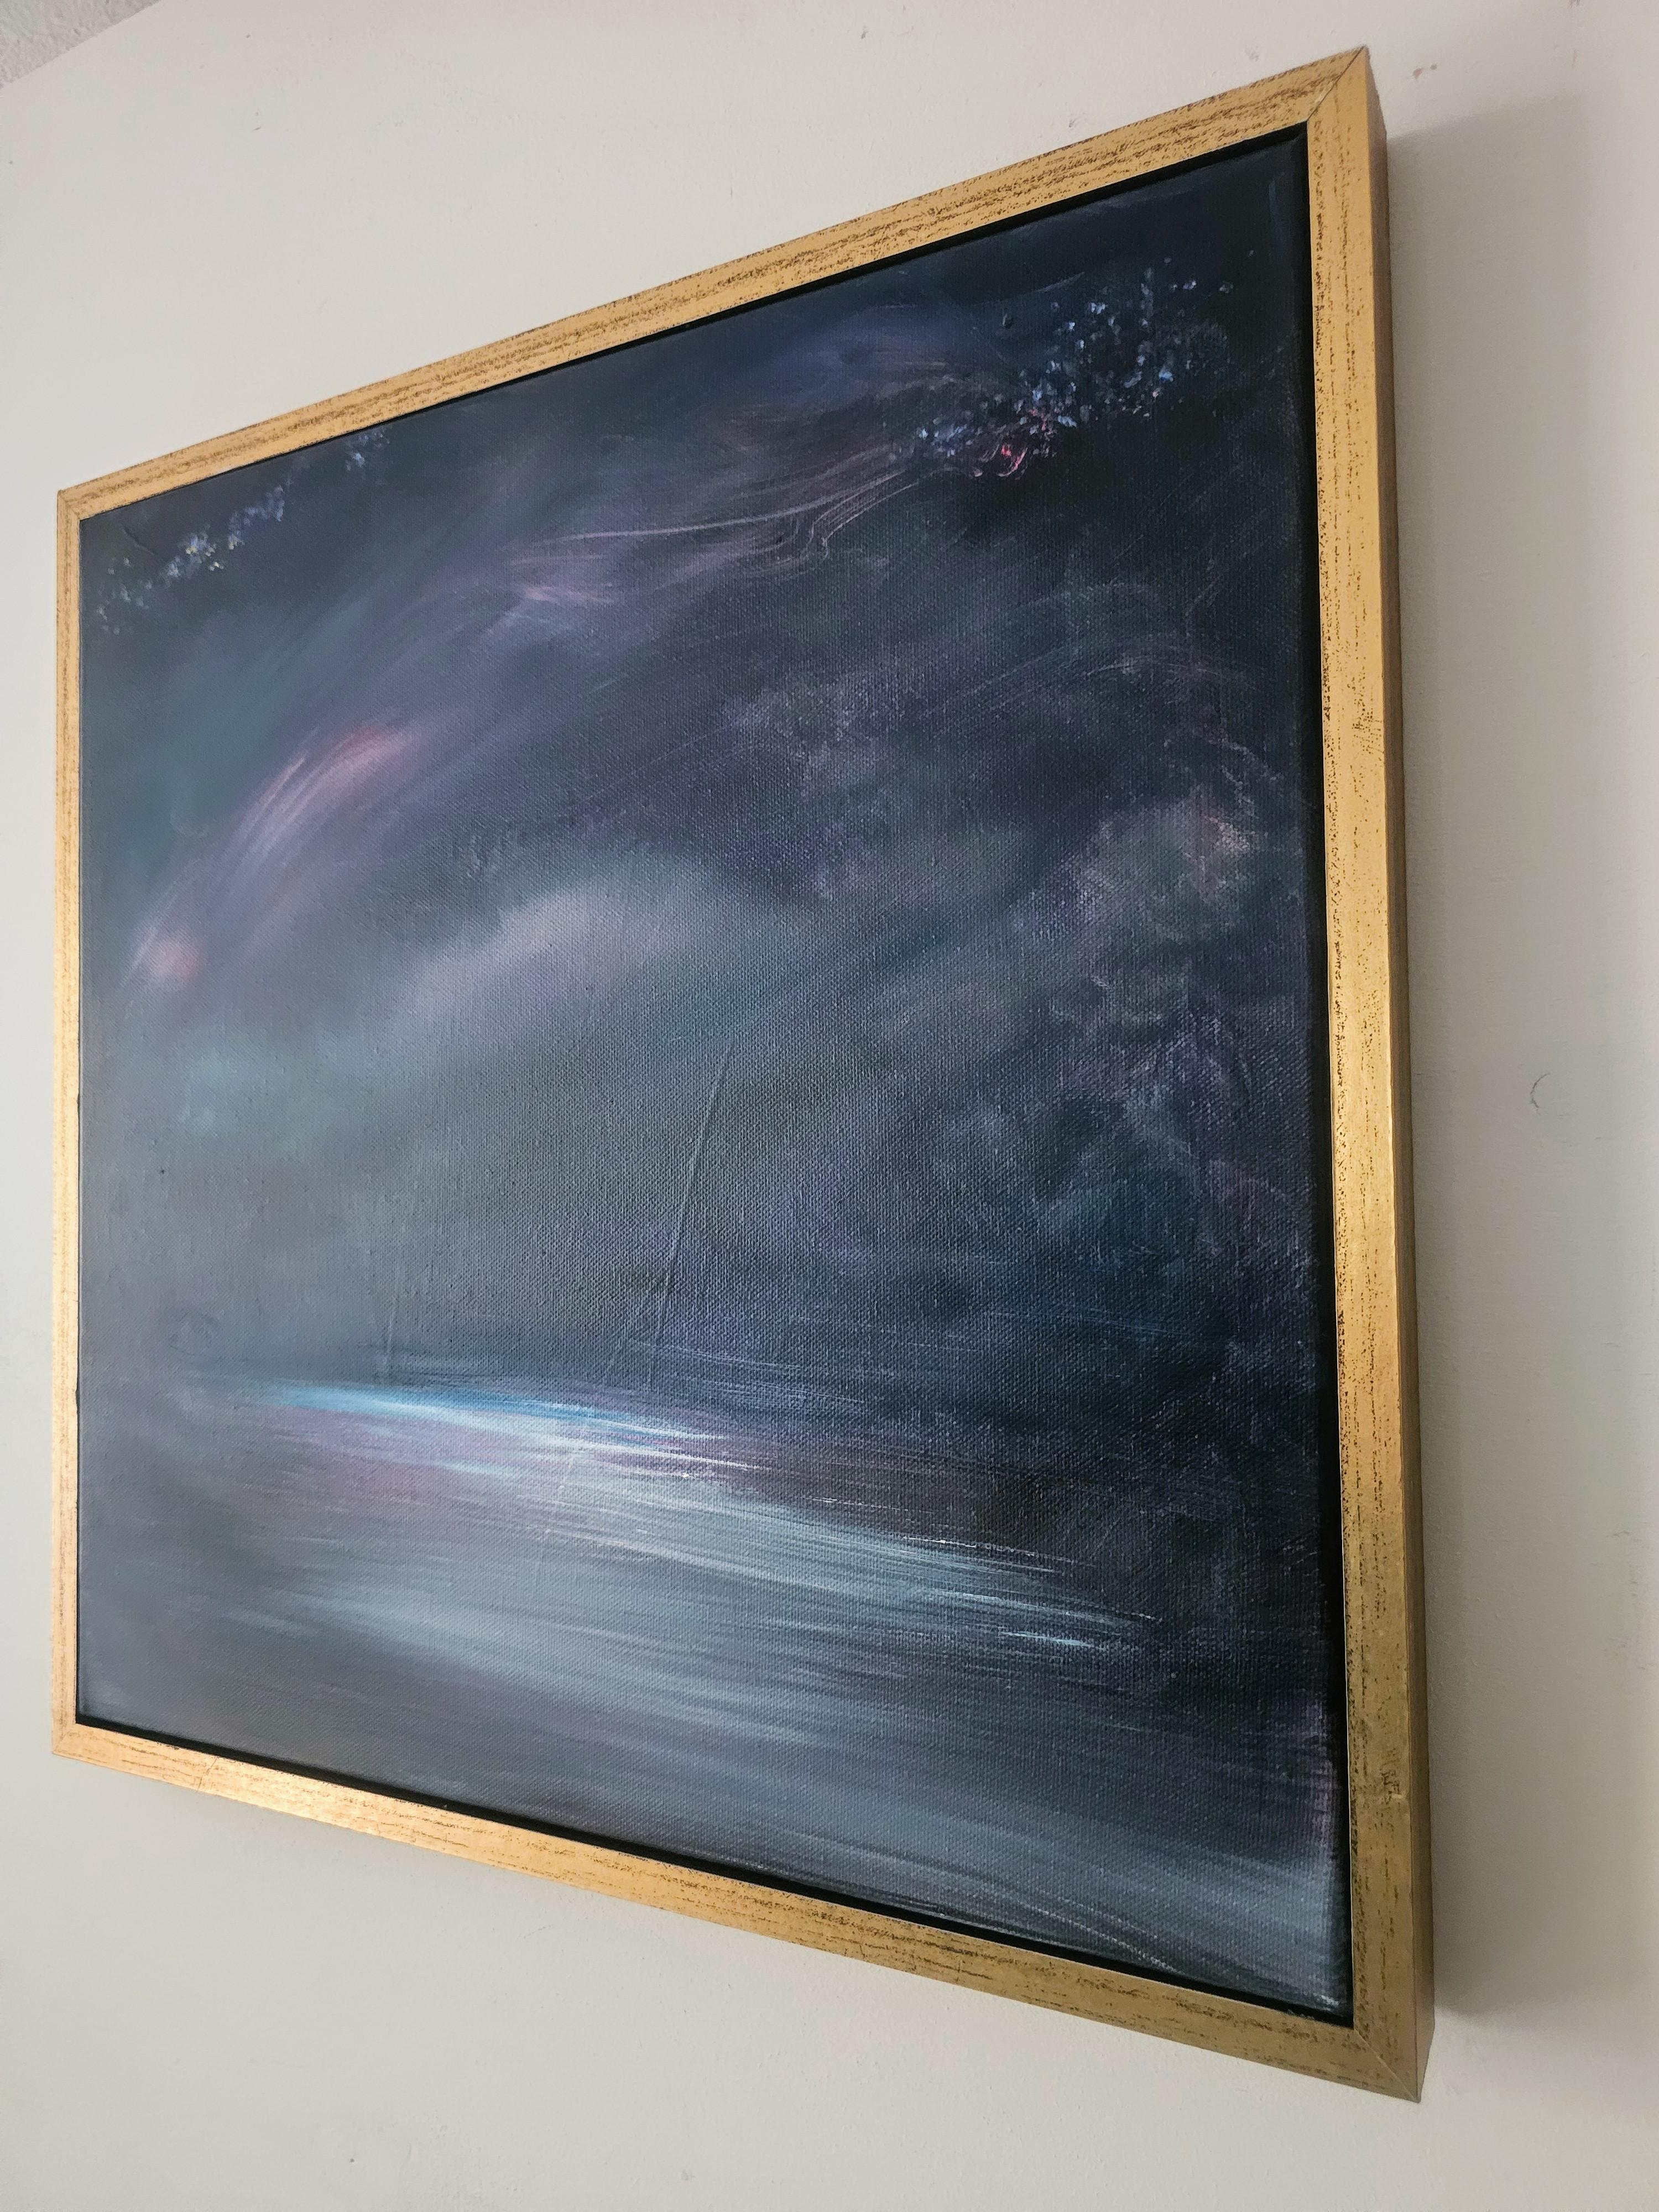 The long walk home - Framed abstract night sky seascape painting For Sale 2